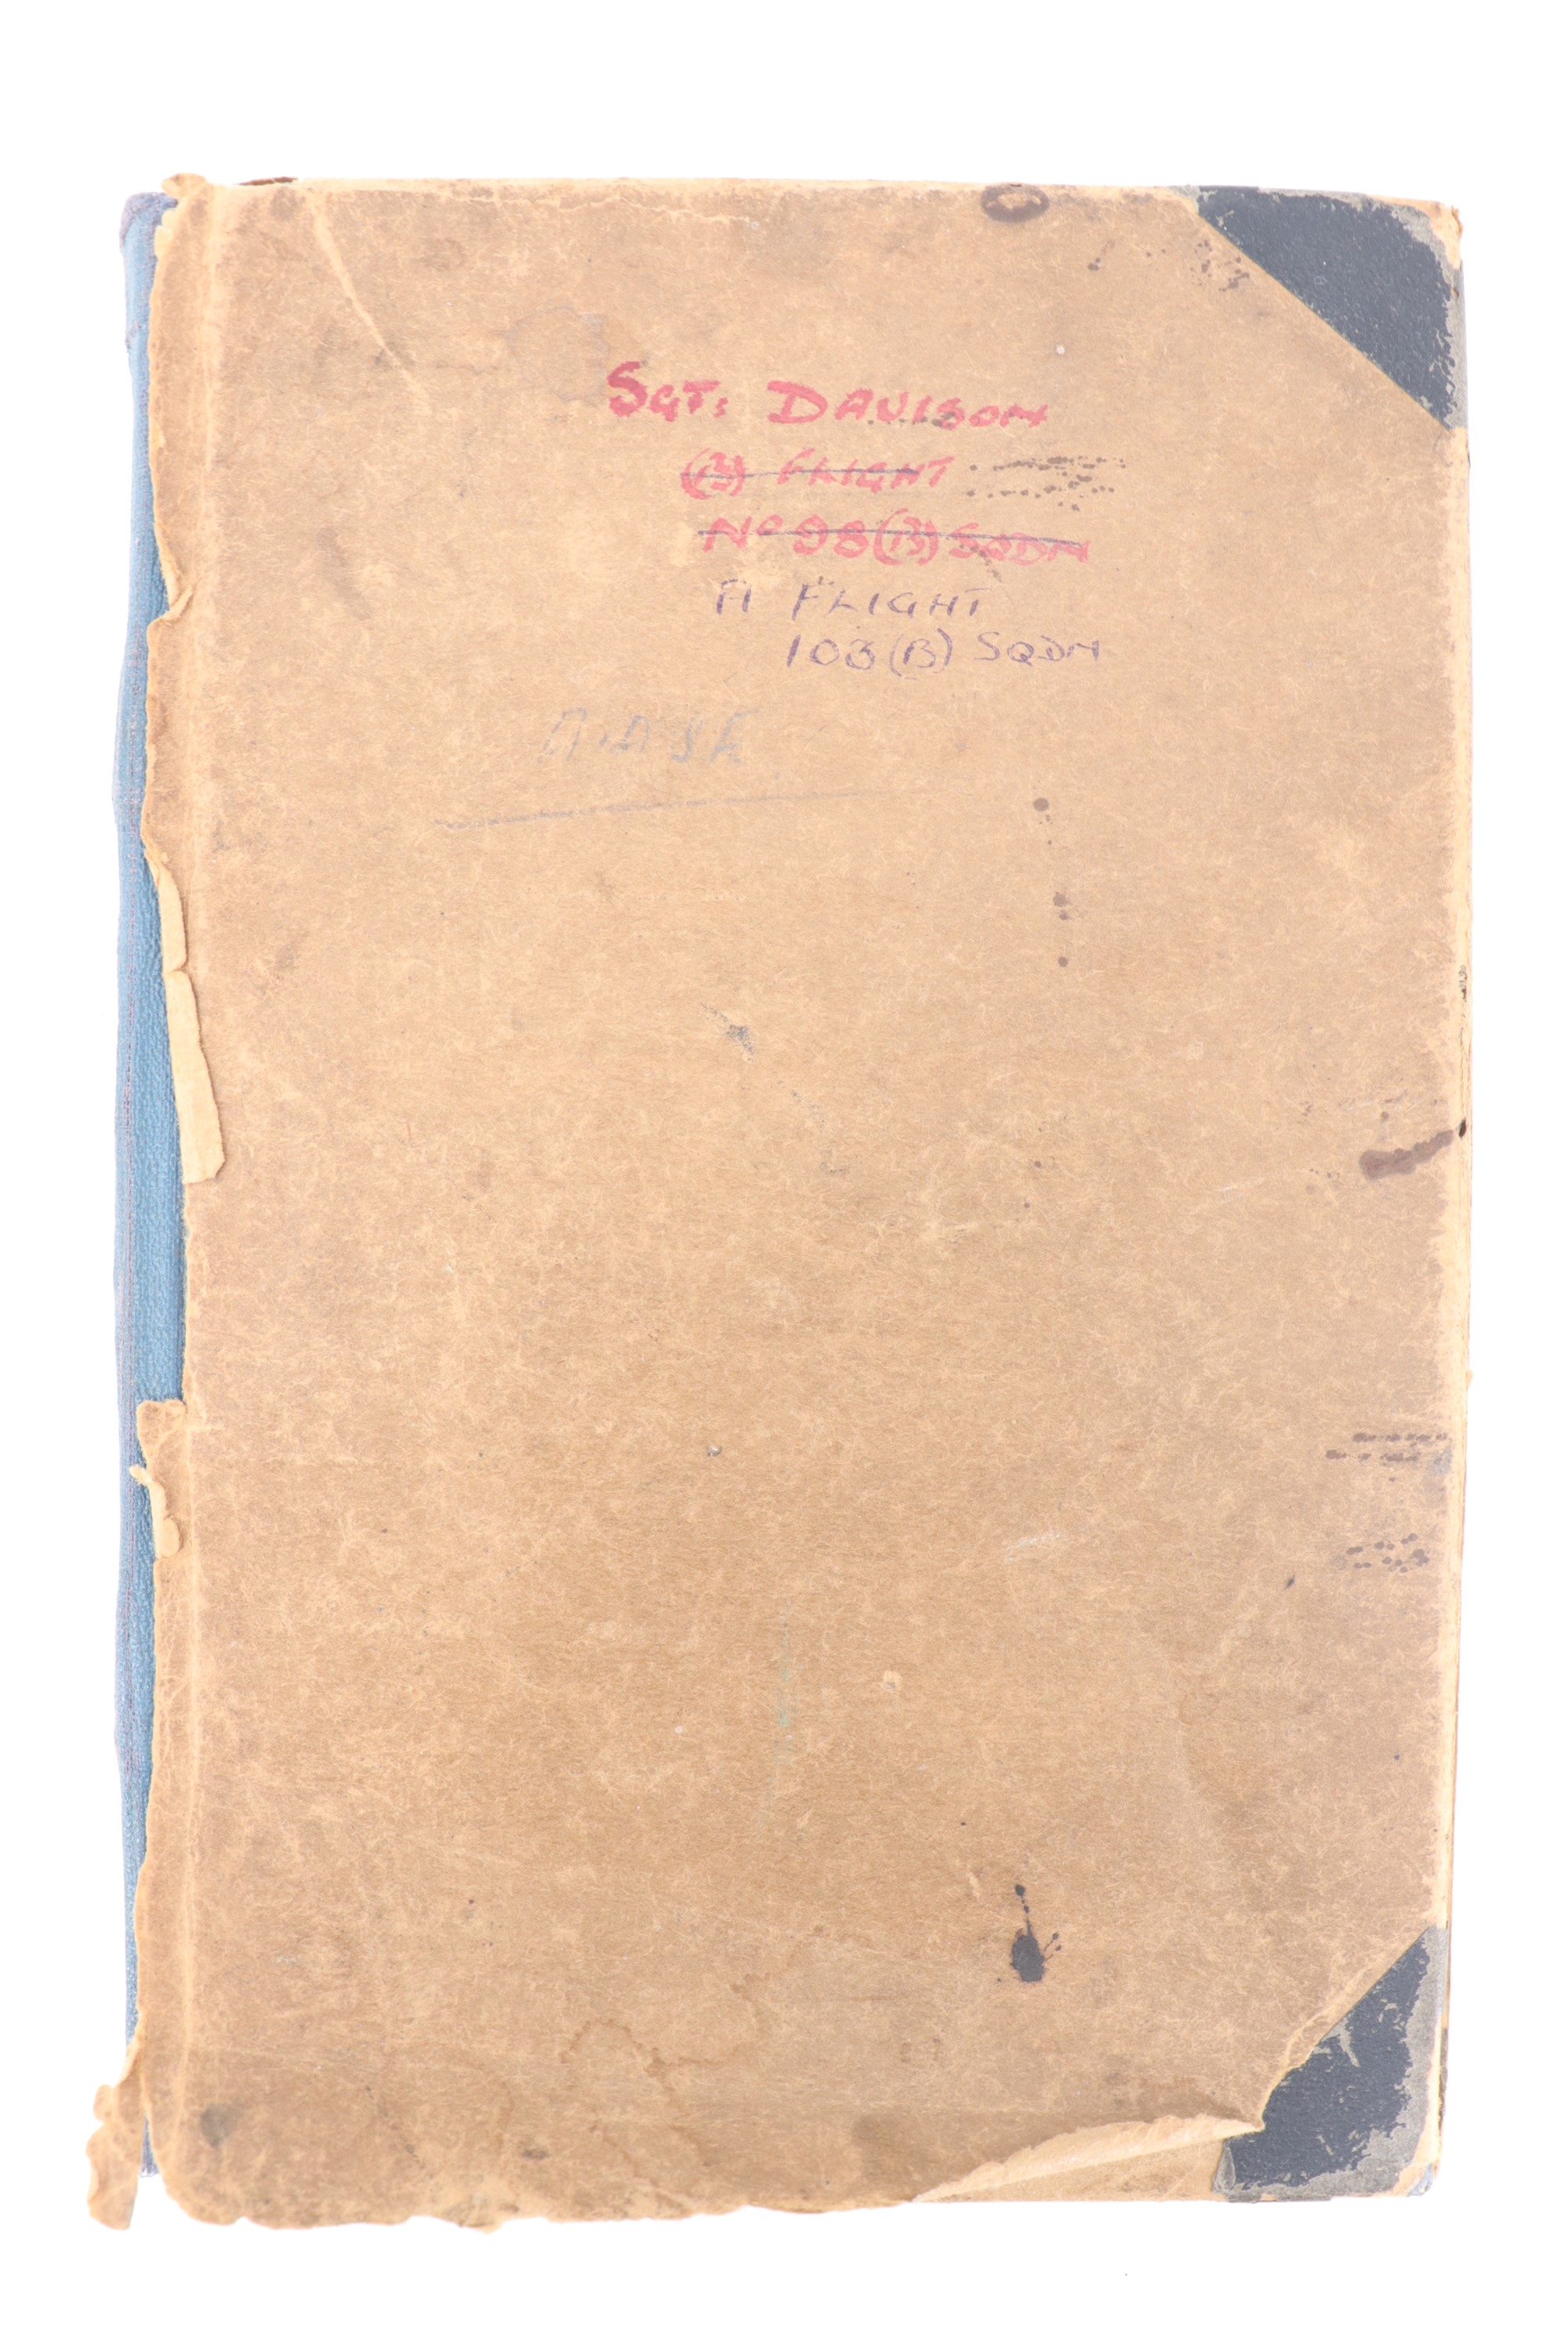 A Second World War RAF Air Observer's flying log book, that of Corporal / Sergeant F Davison, - Image 4 of 4